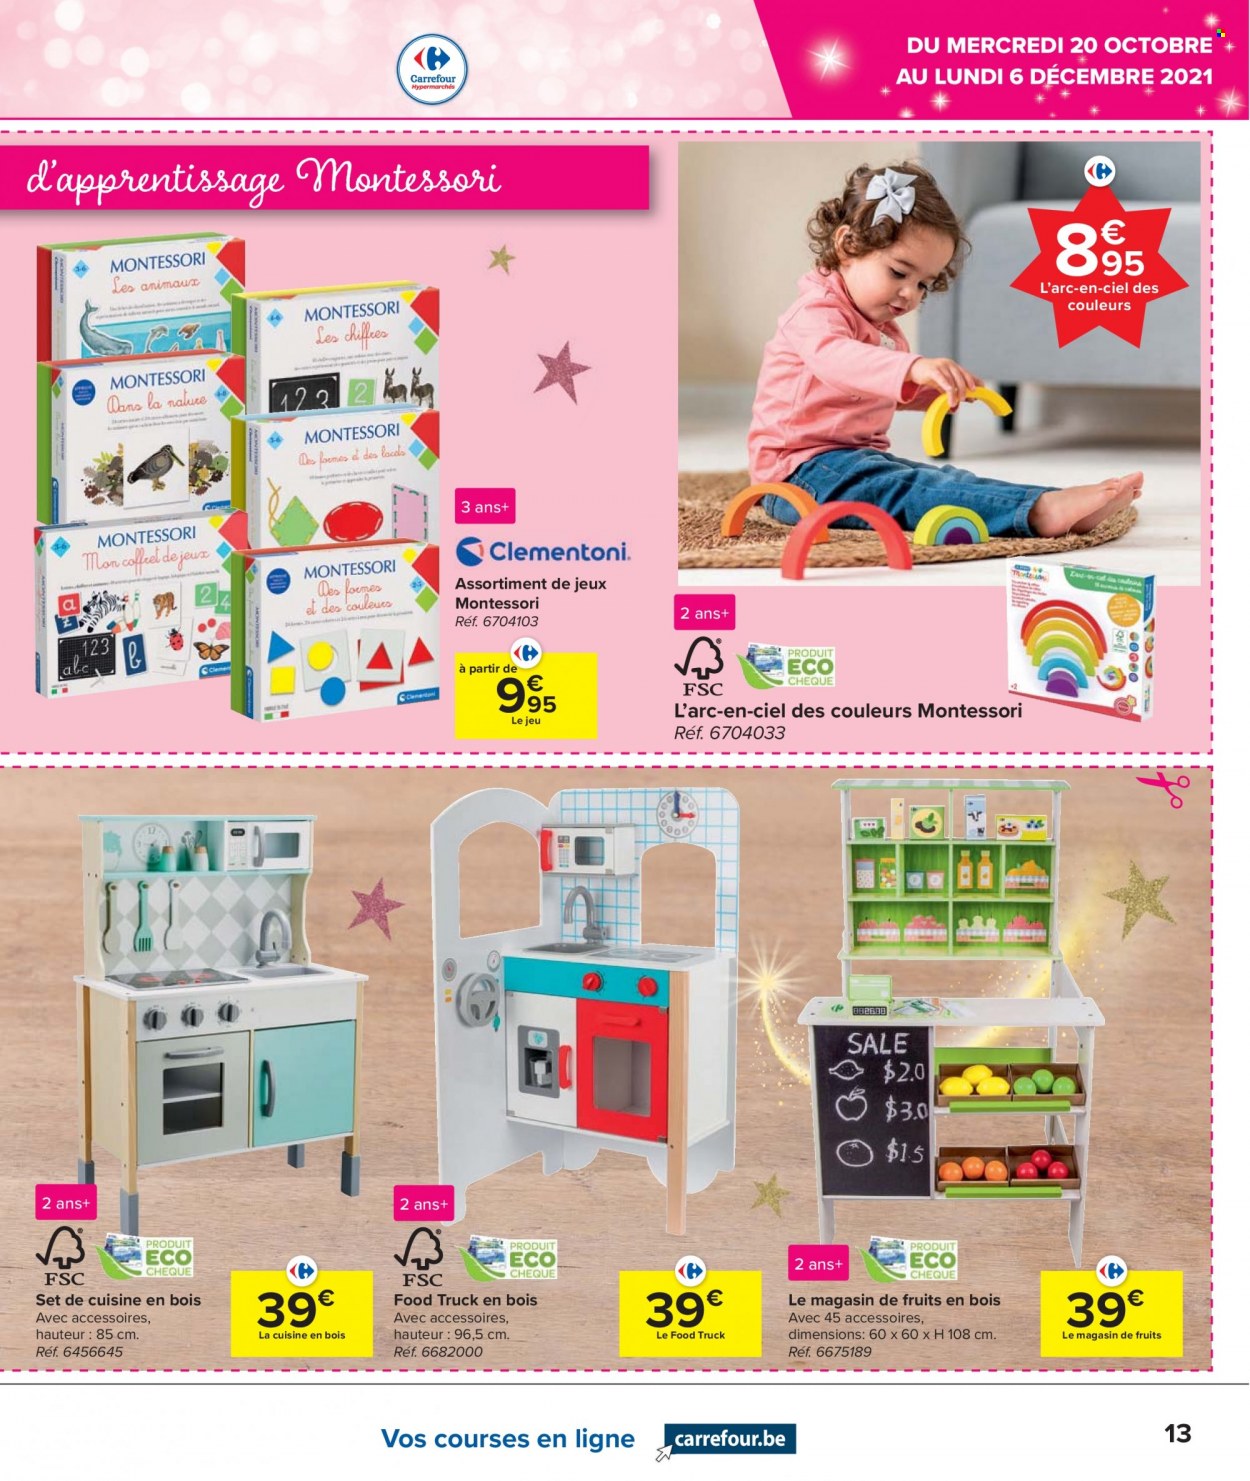 Catalogue Carrefour hypermarkt - 20.10.2021 - 6.12.2021. Page 13.